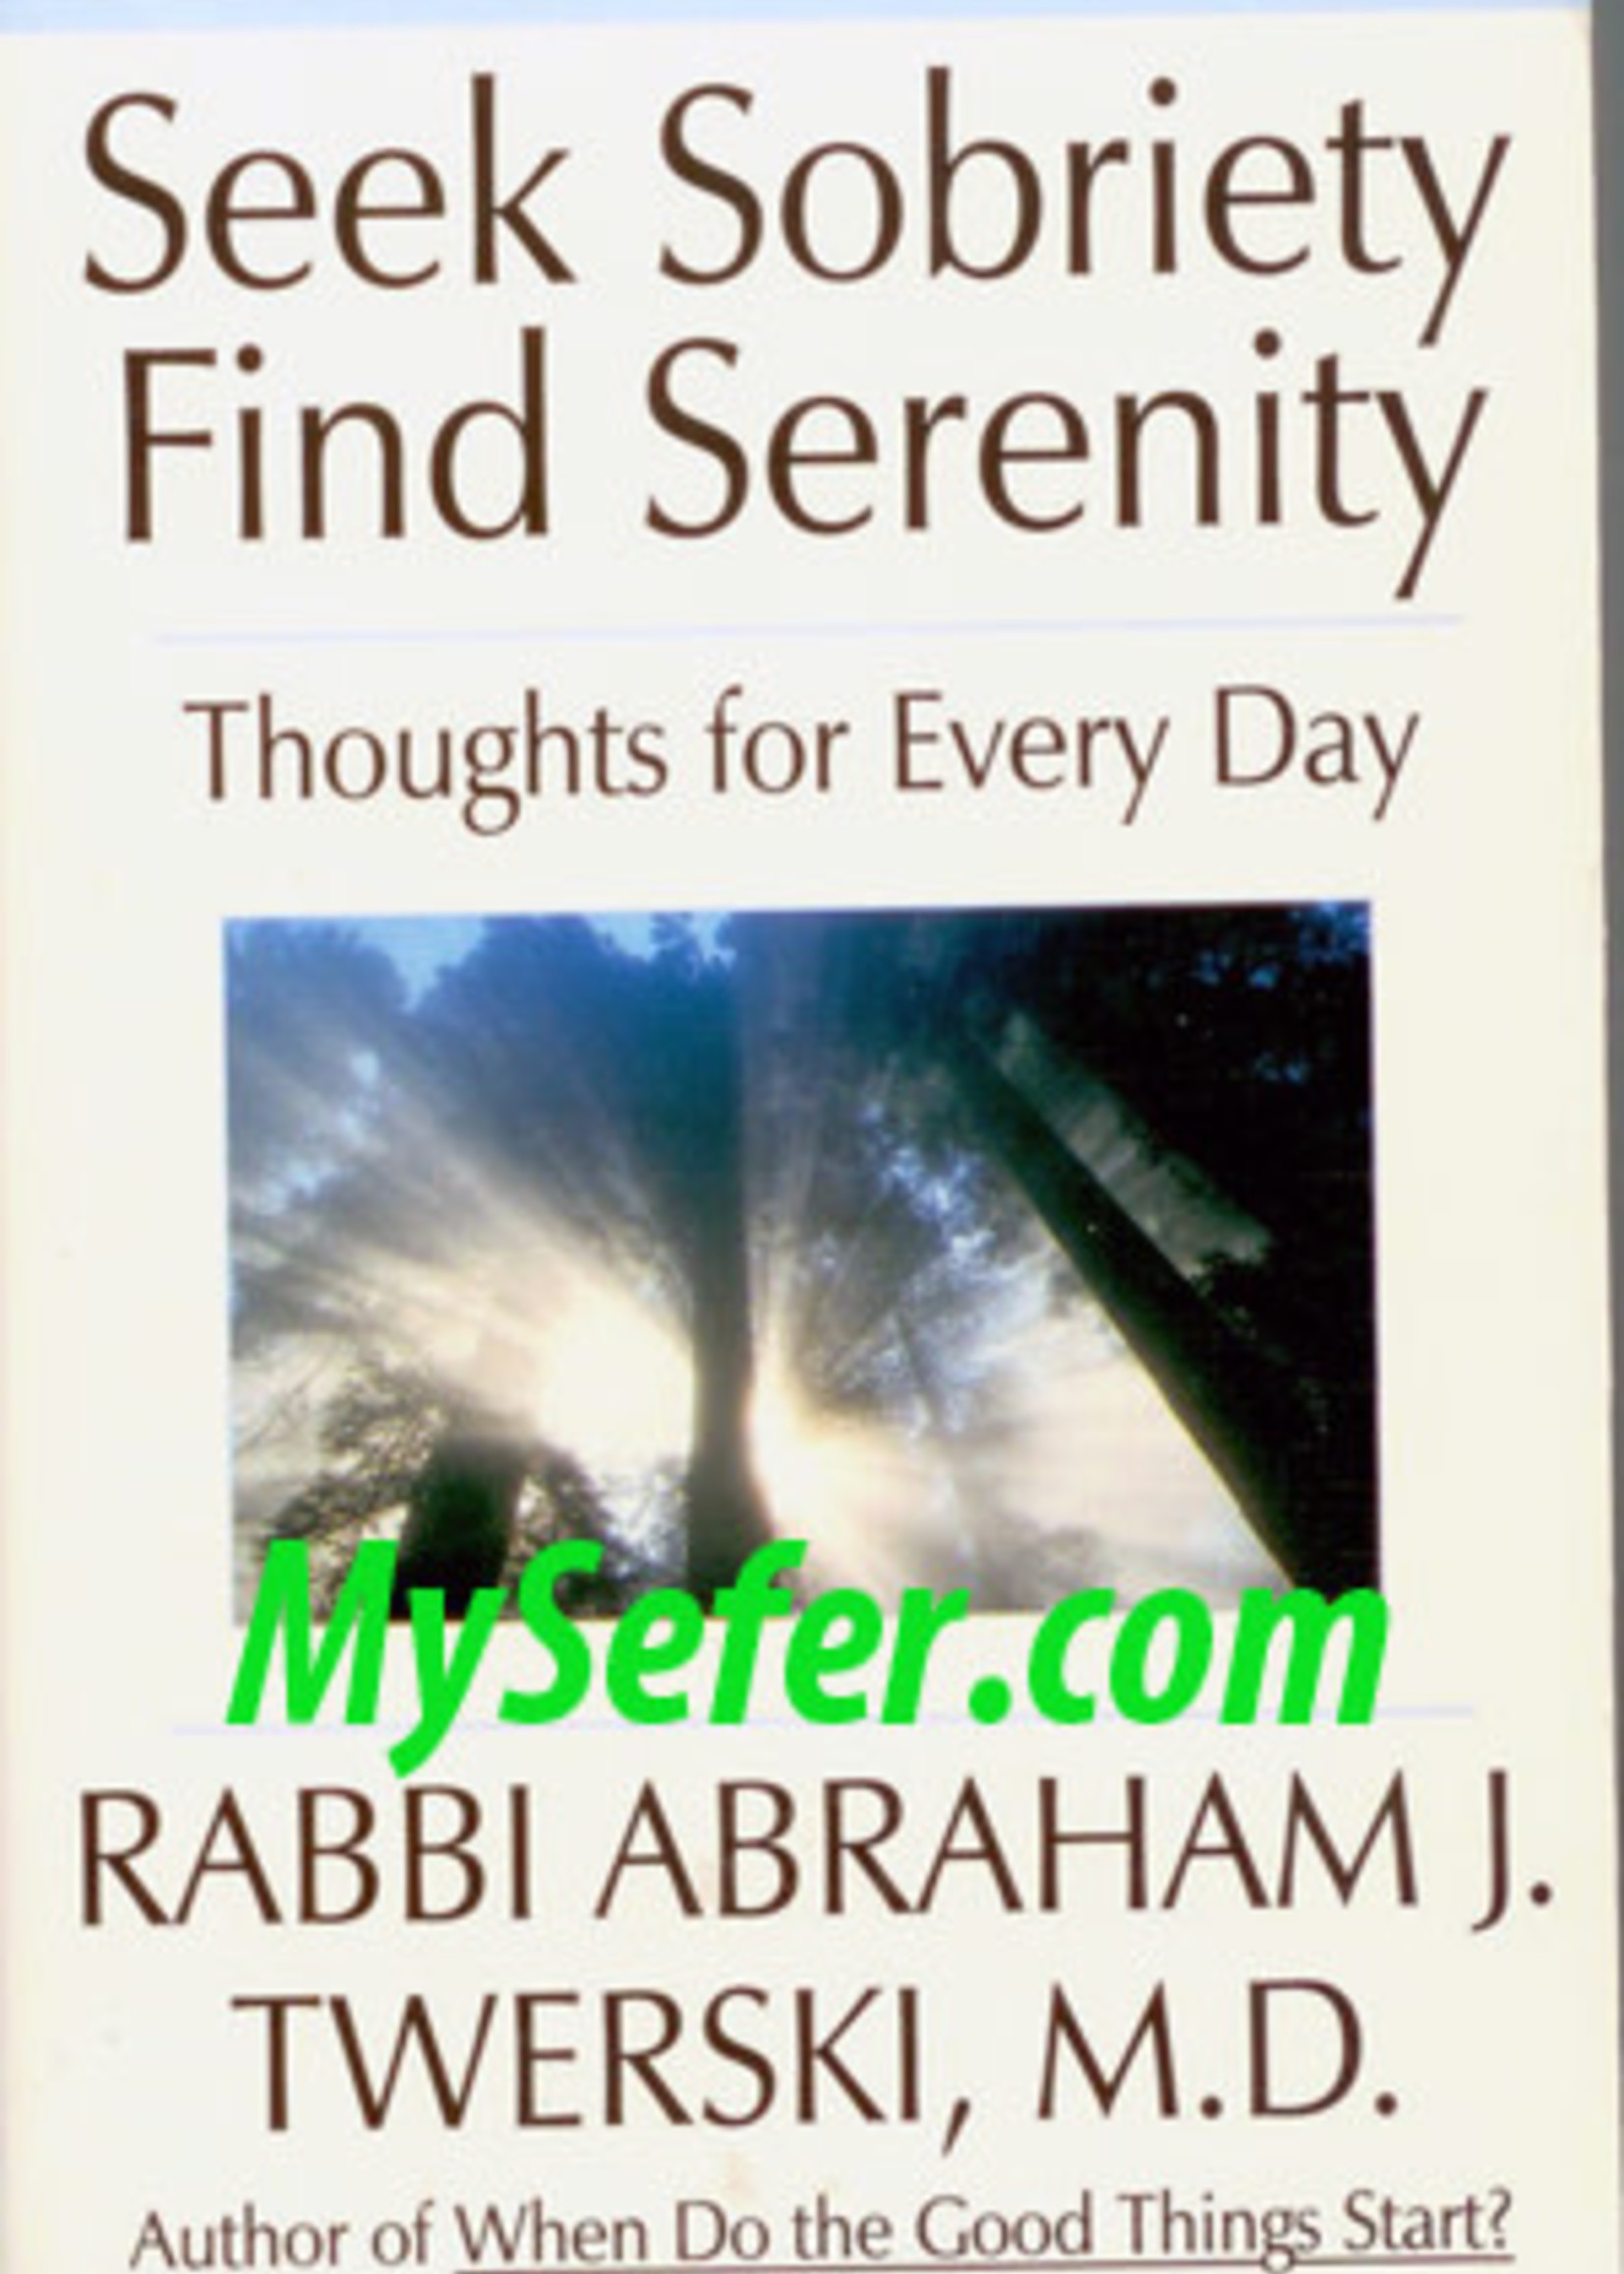 Seek Sobriety Find Serenity Thoughts for Every Day-Rabbi Dr. Twerski